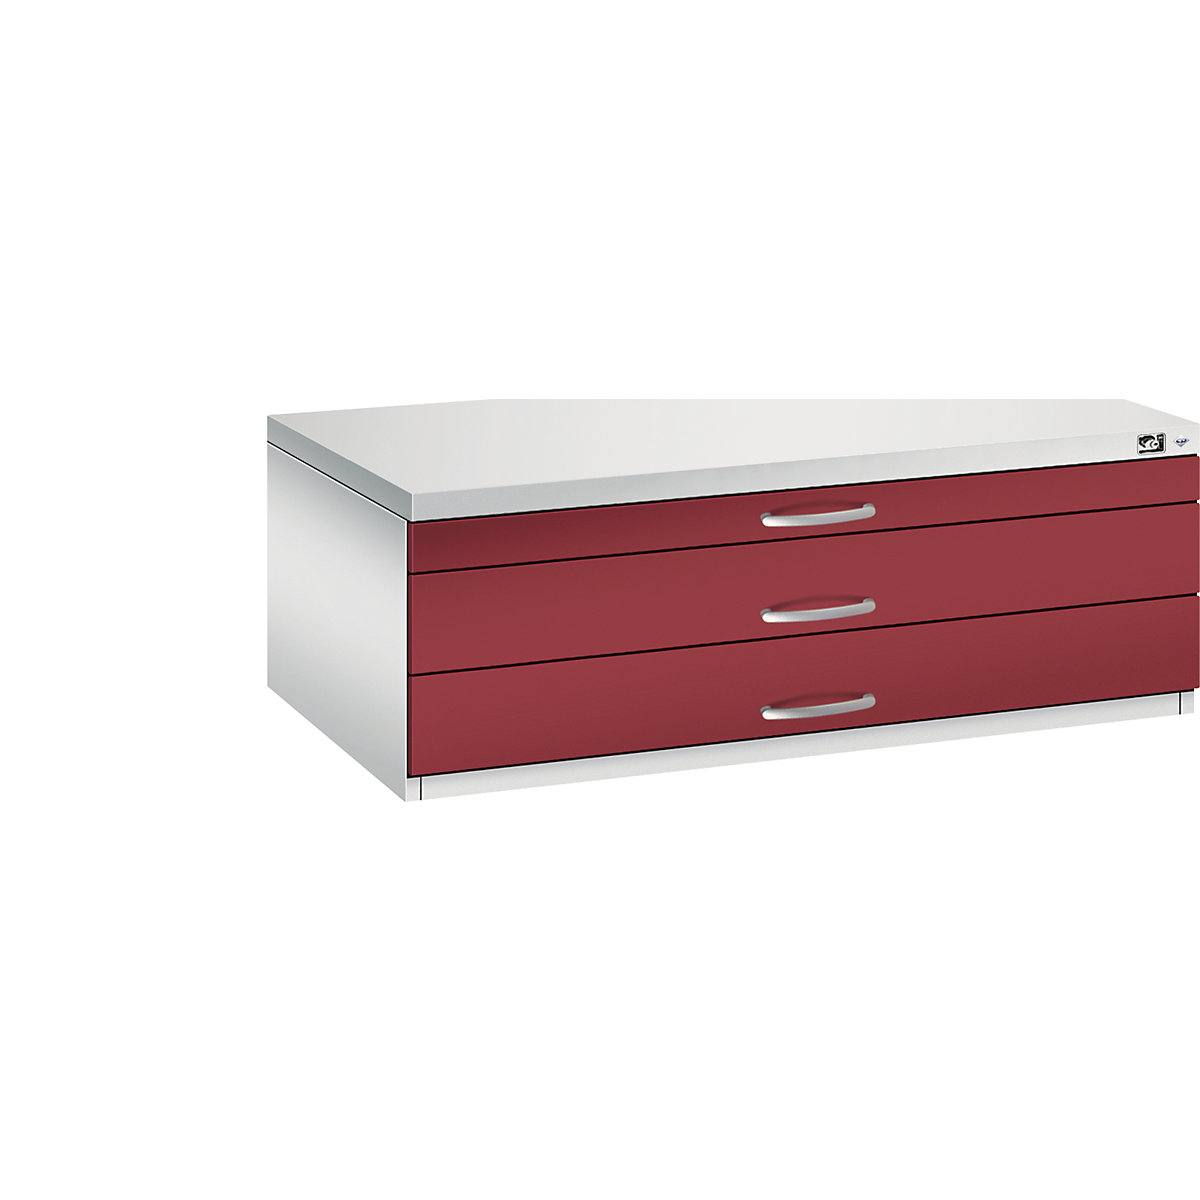 Drawing cabinet – C+P, A1, 3 drawers, height 420 mm, light grey / ruby red-15